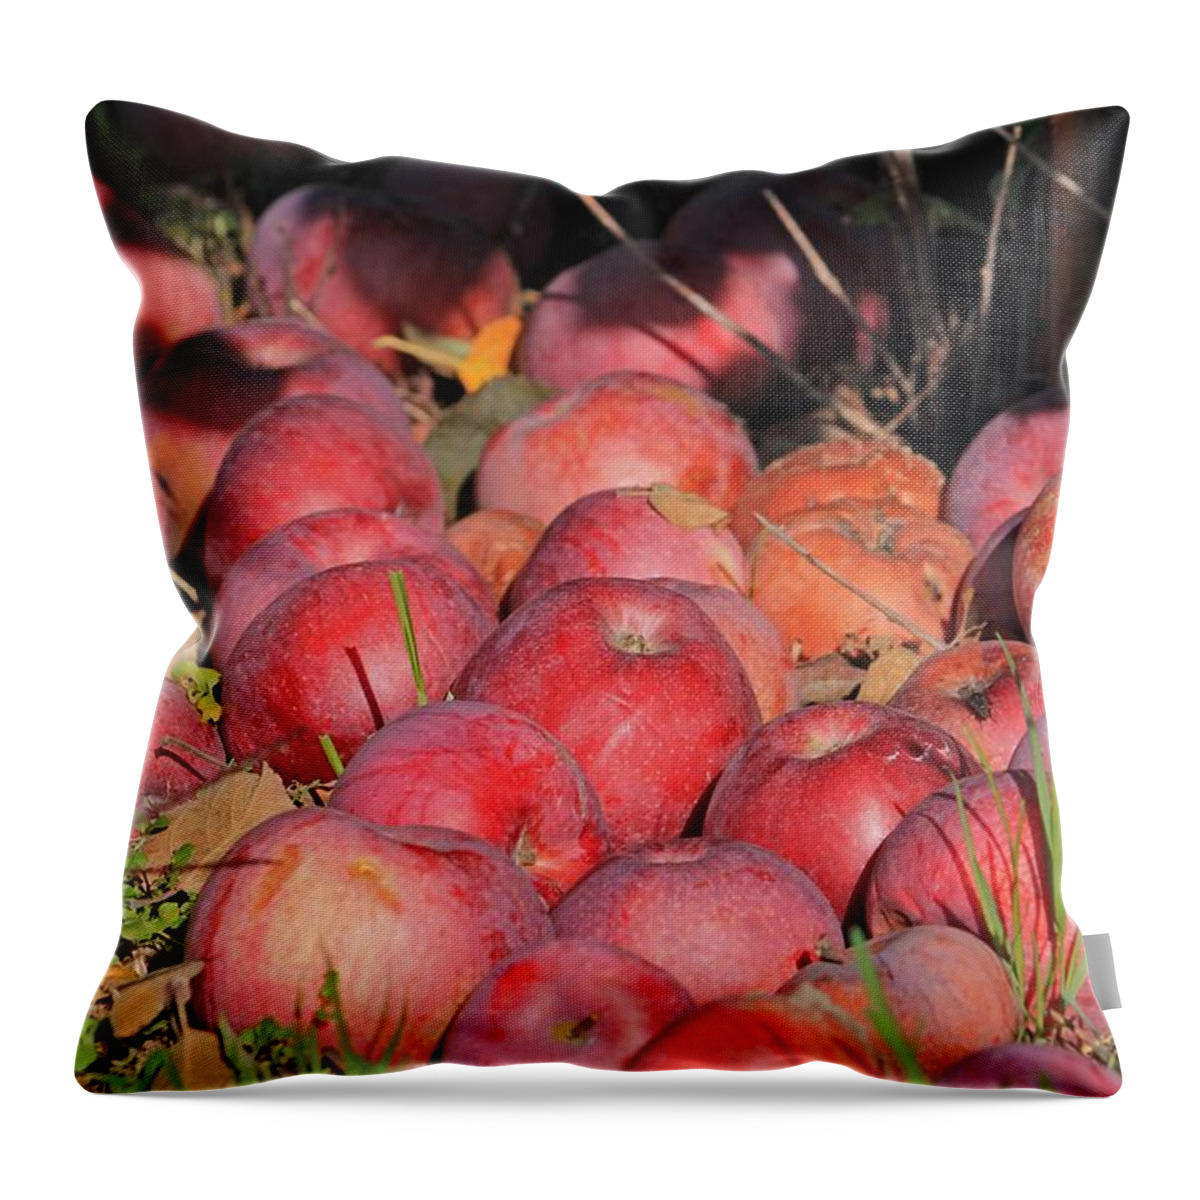 Apples Throw Pillow featuring the photograph Apple Drops 2 by Michael Saunders